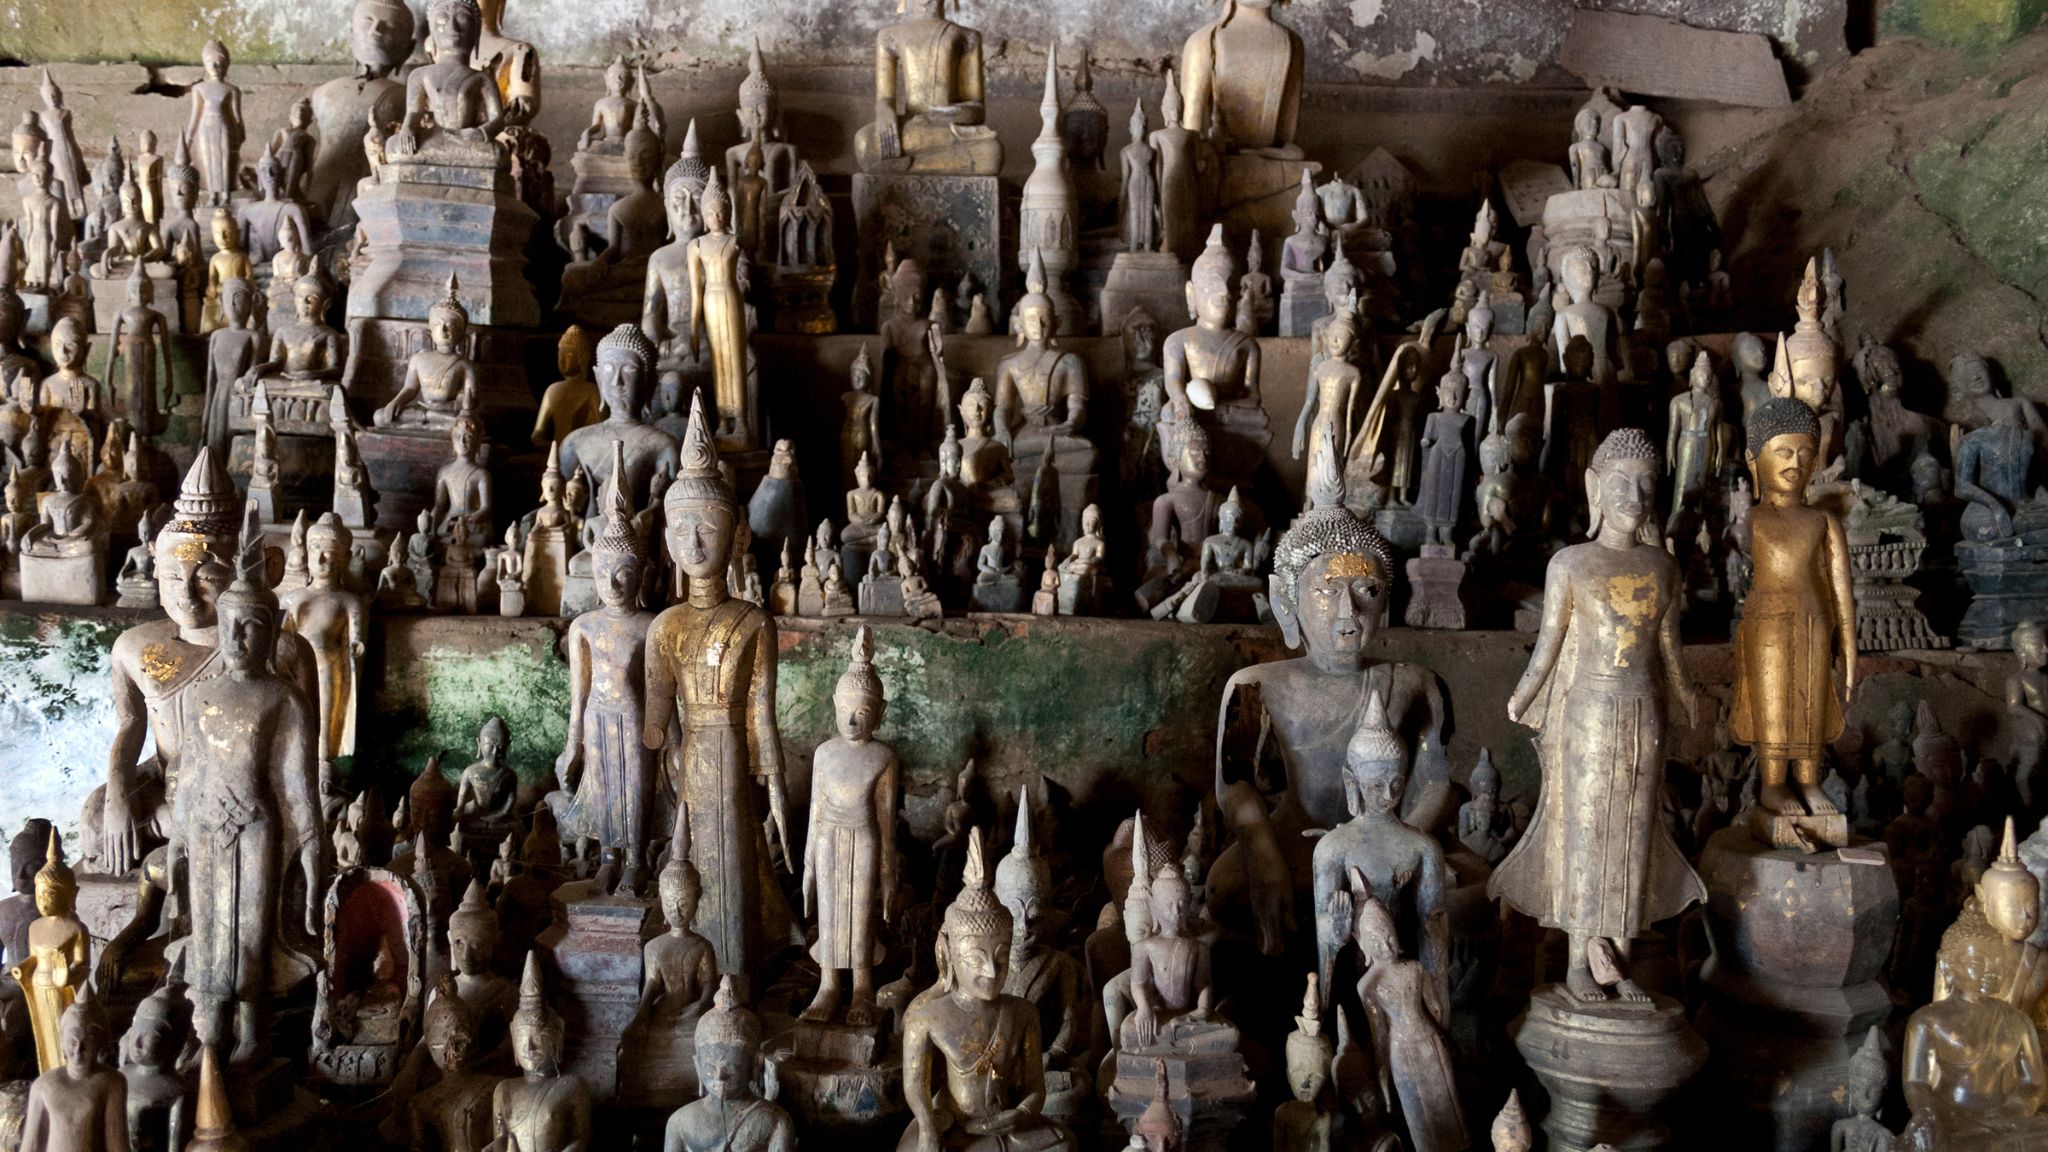 Day 6 Astonishing Collection Of Buddha Statues In Pak Ou Caves